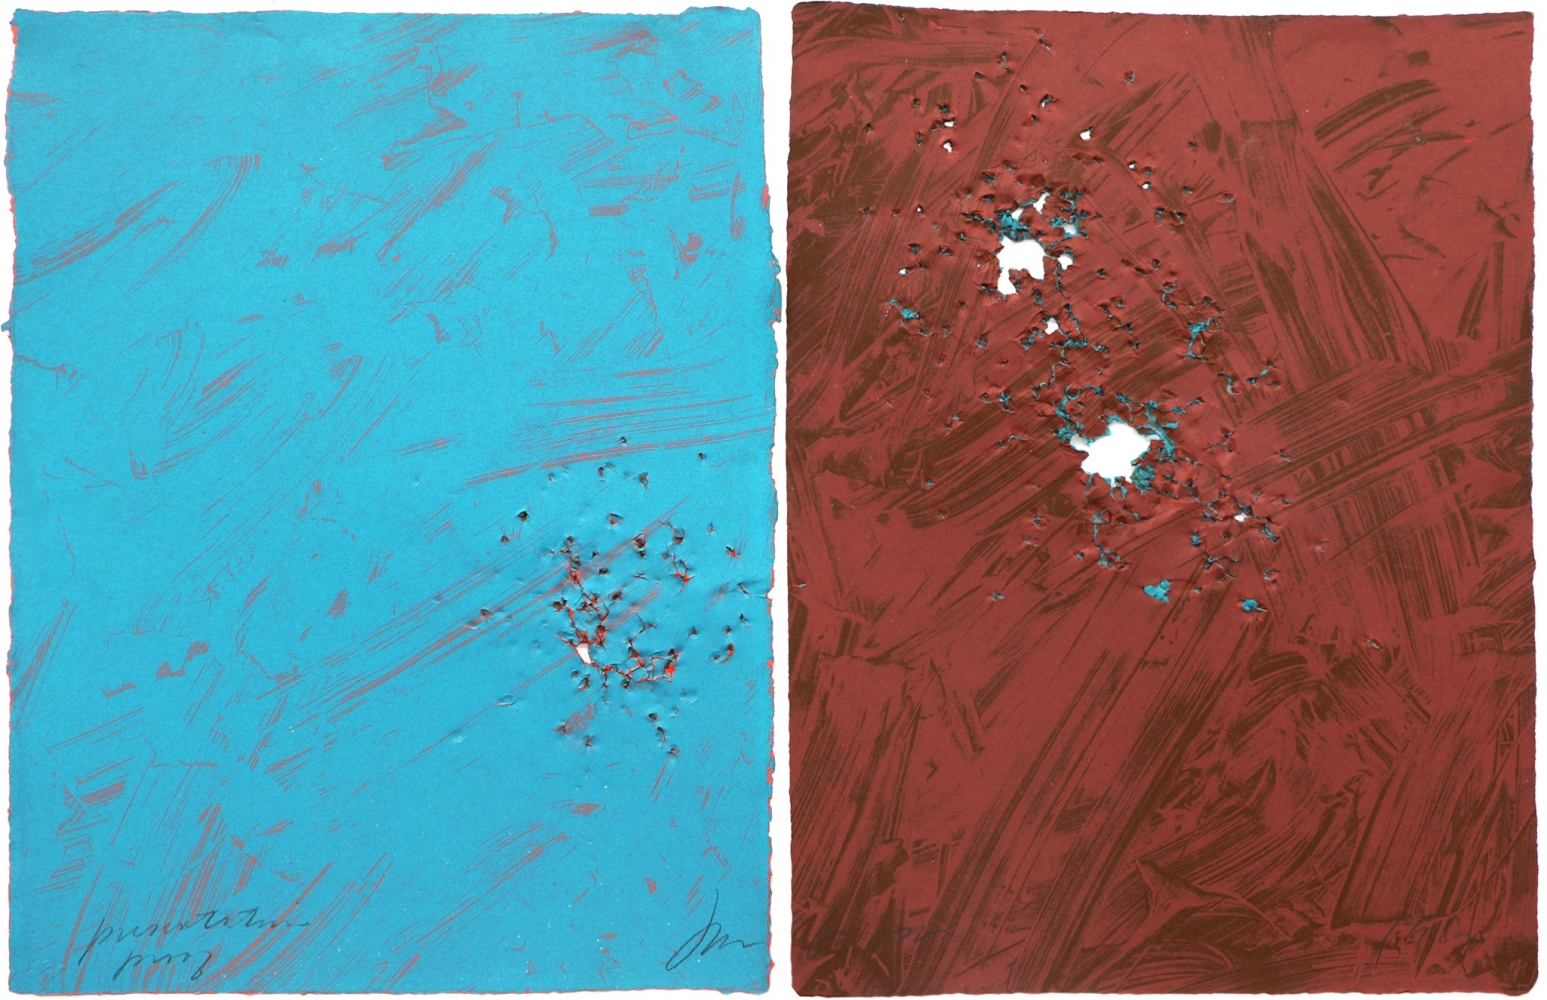 Joe Goode  Untitled, 1981-82  Lithograph with gunshot impression by artist (diptych)